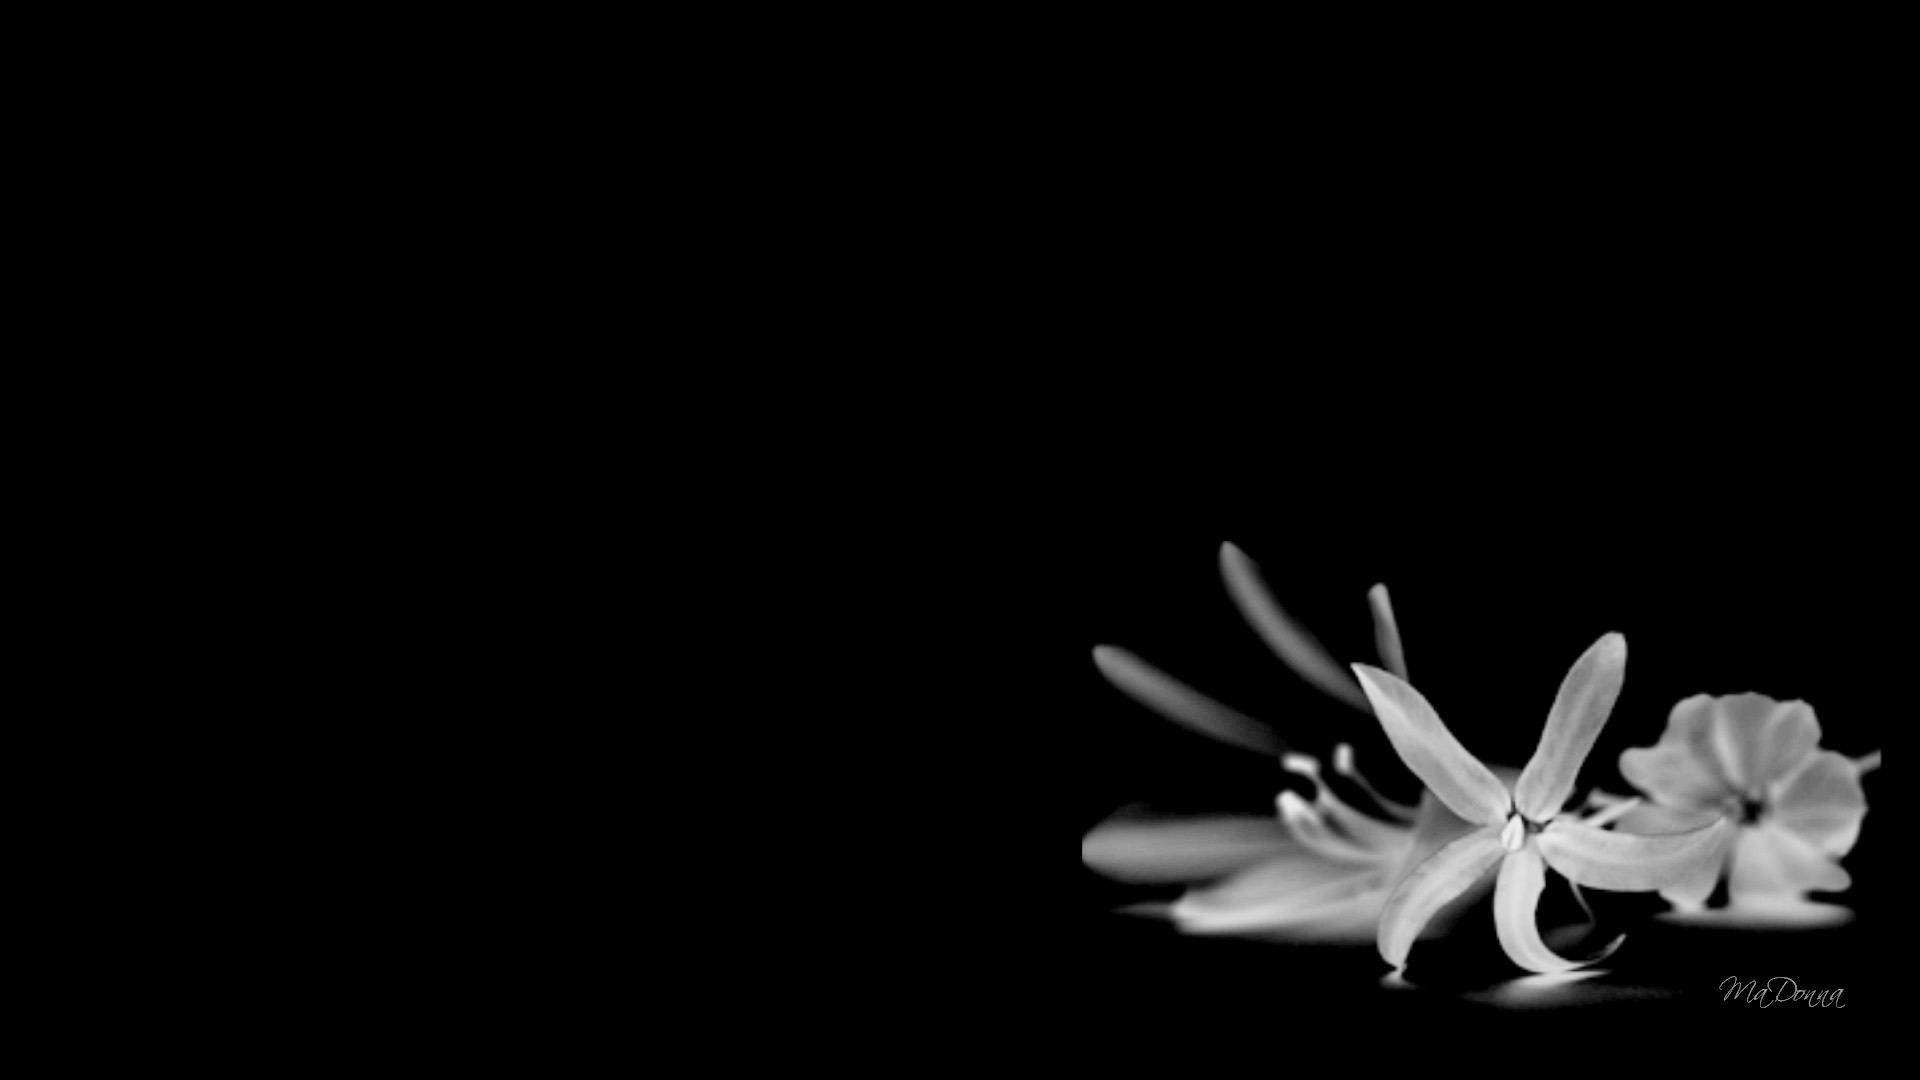 Black And White Flower On The Ground Background